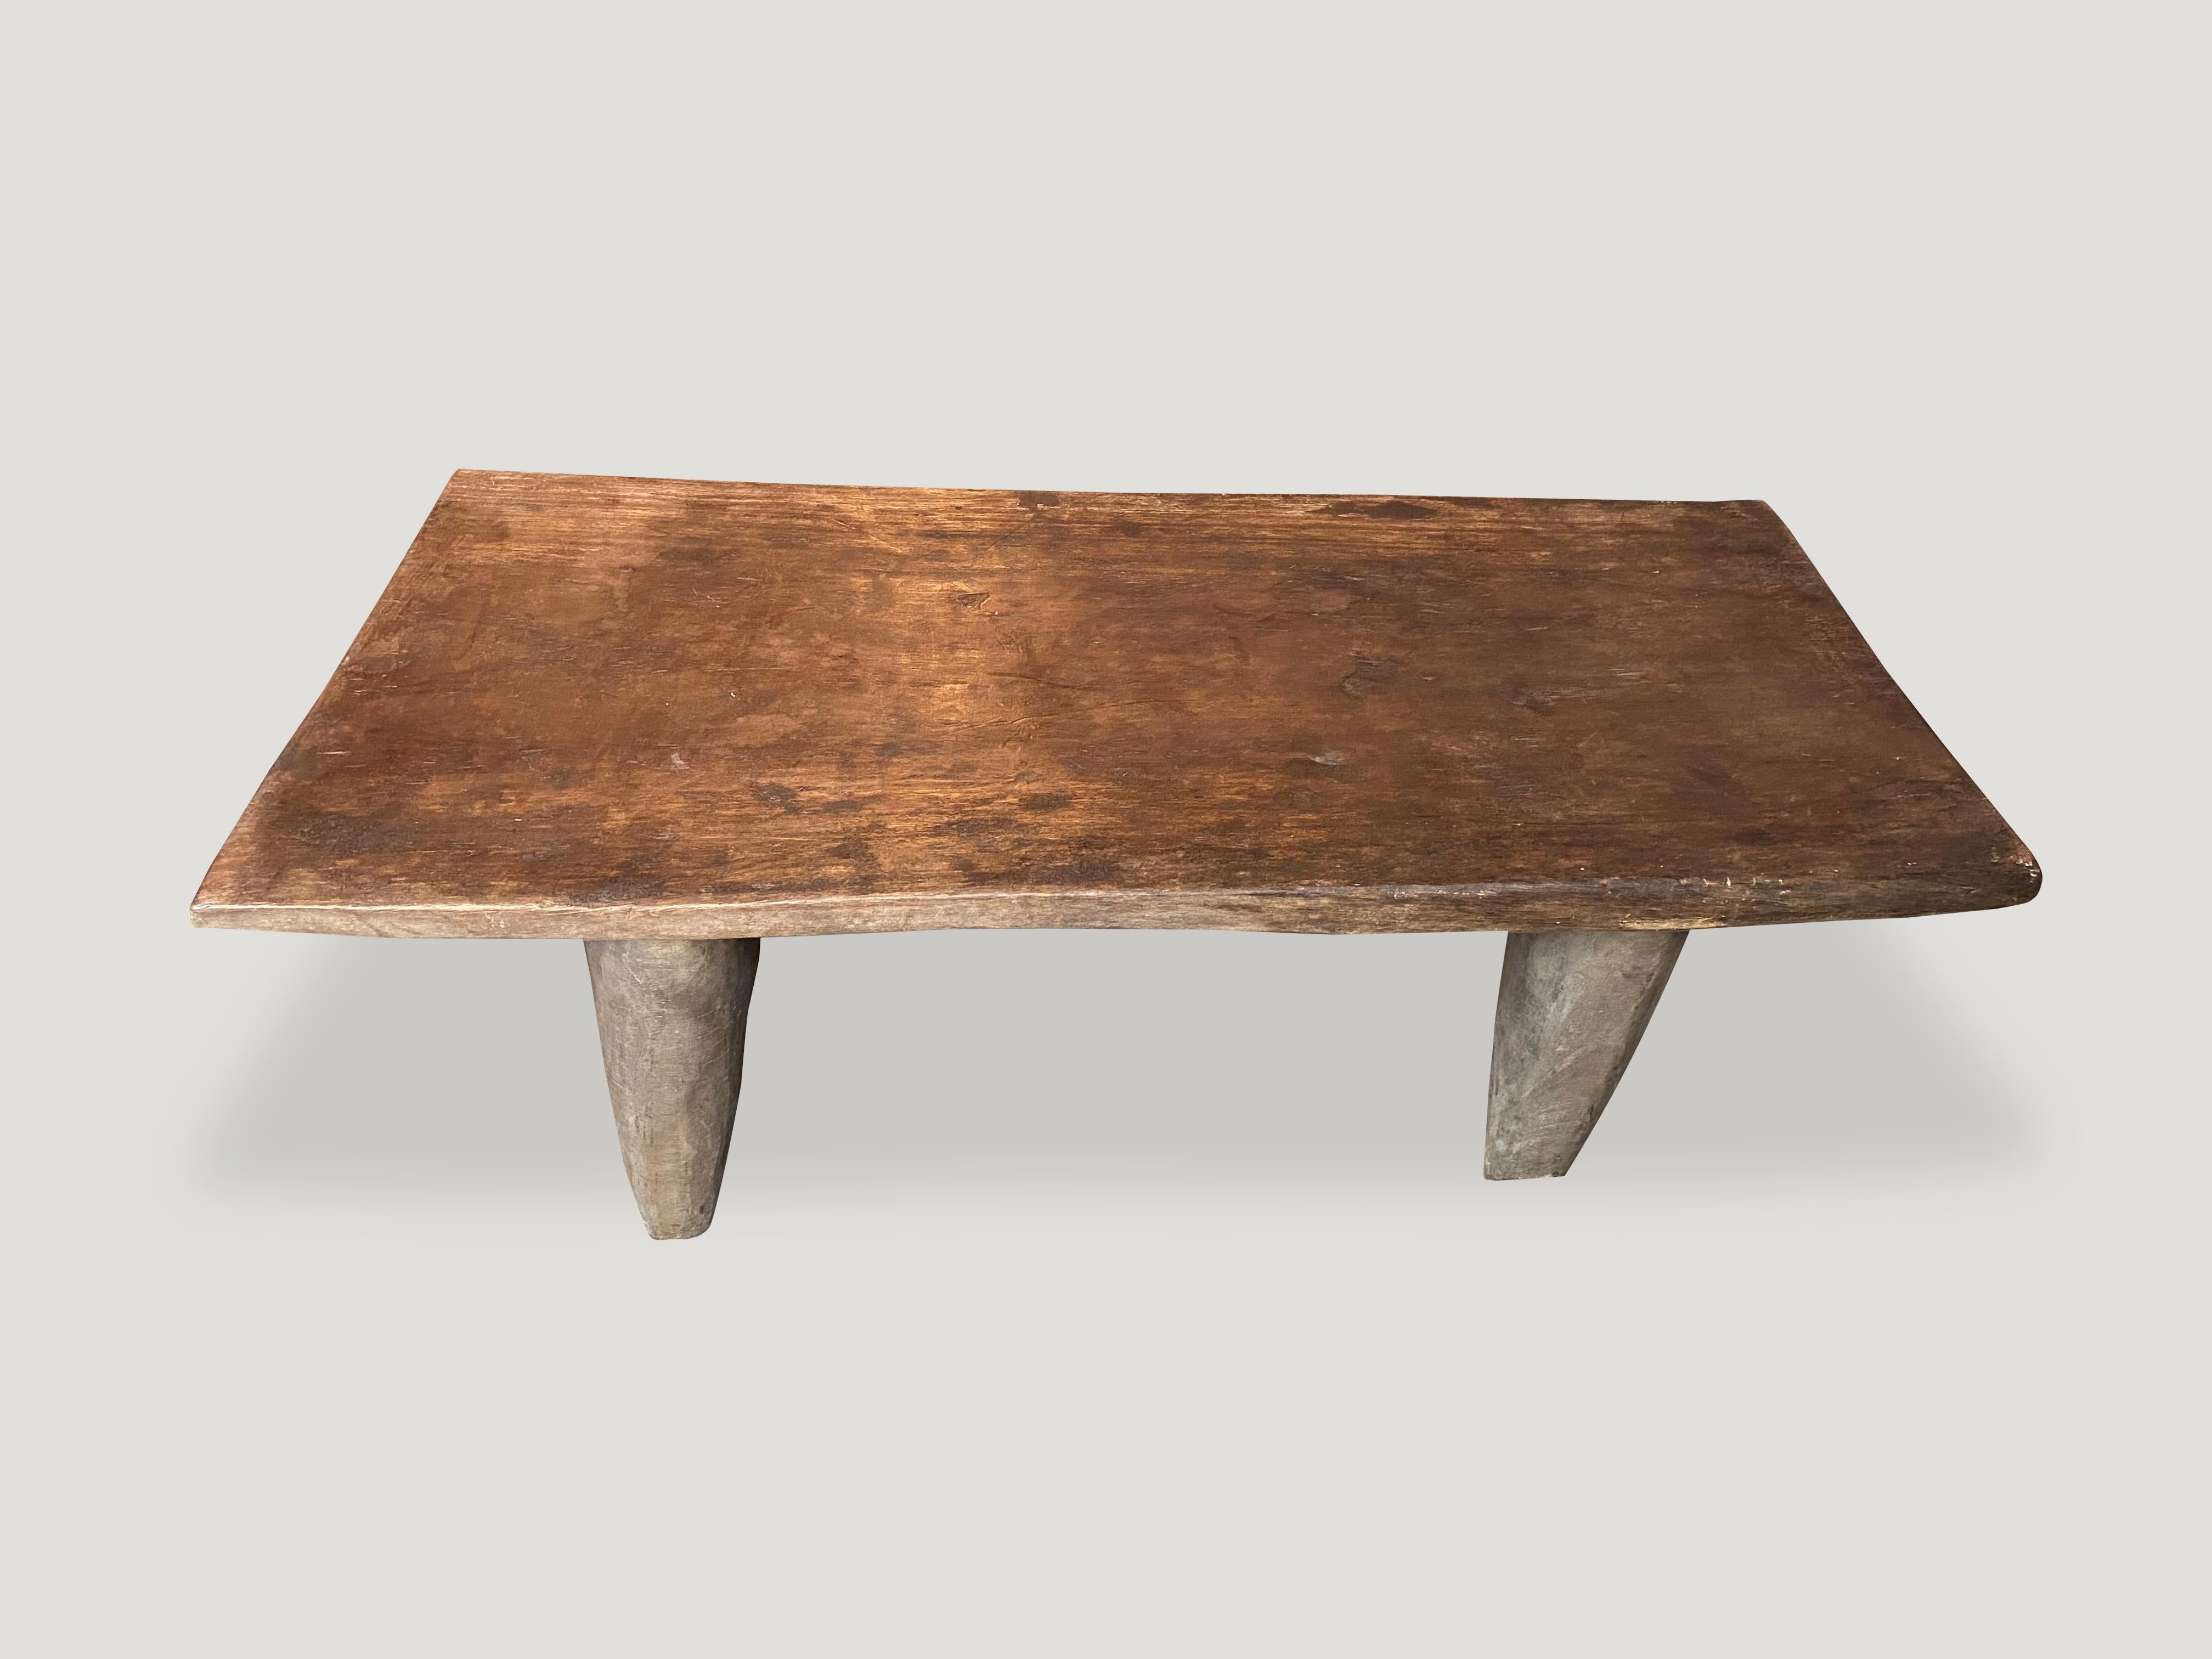 Antique bench or coffee table hand carved by the Senufo tribes from a single block of iroko wood, native to the west coast of Africa. The wood is tough, dense and very durable. Shown with cone style legs.

This bench or coffee table was sourced in